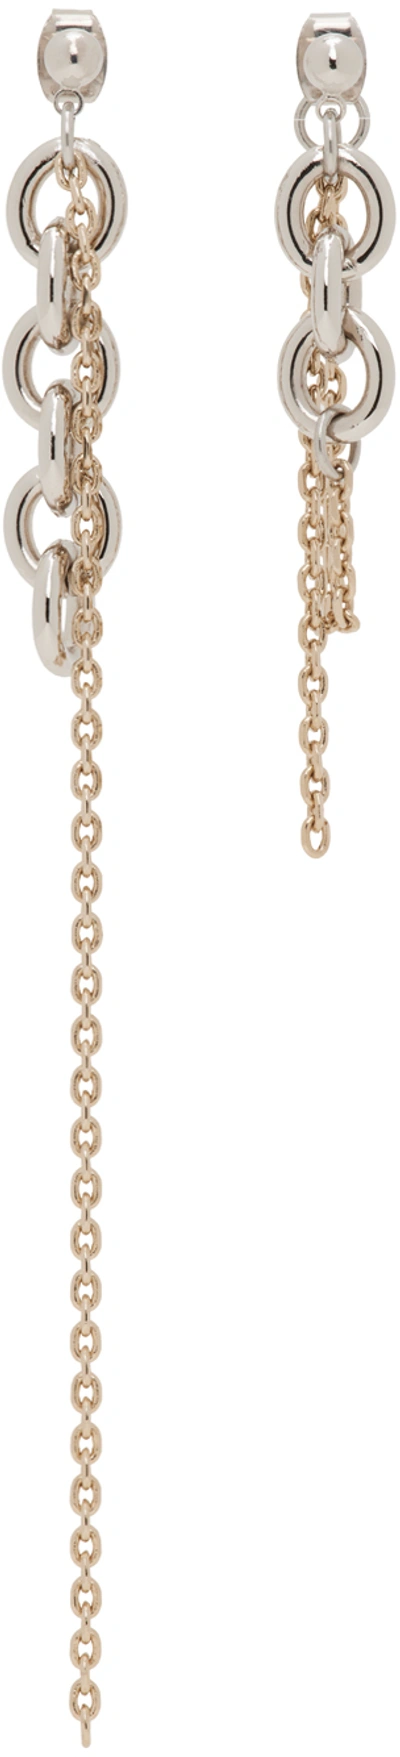 Justine Clenquet Silver & Gold Dana Earrings In Silver Gold